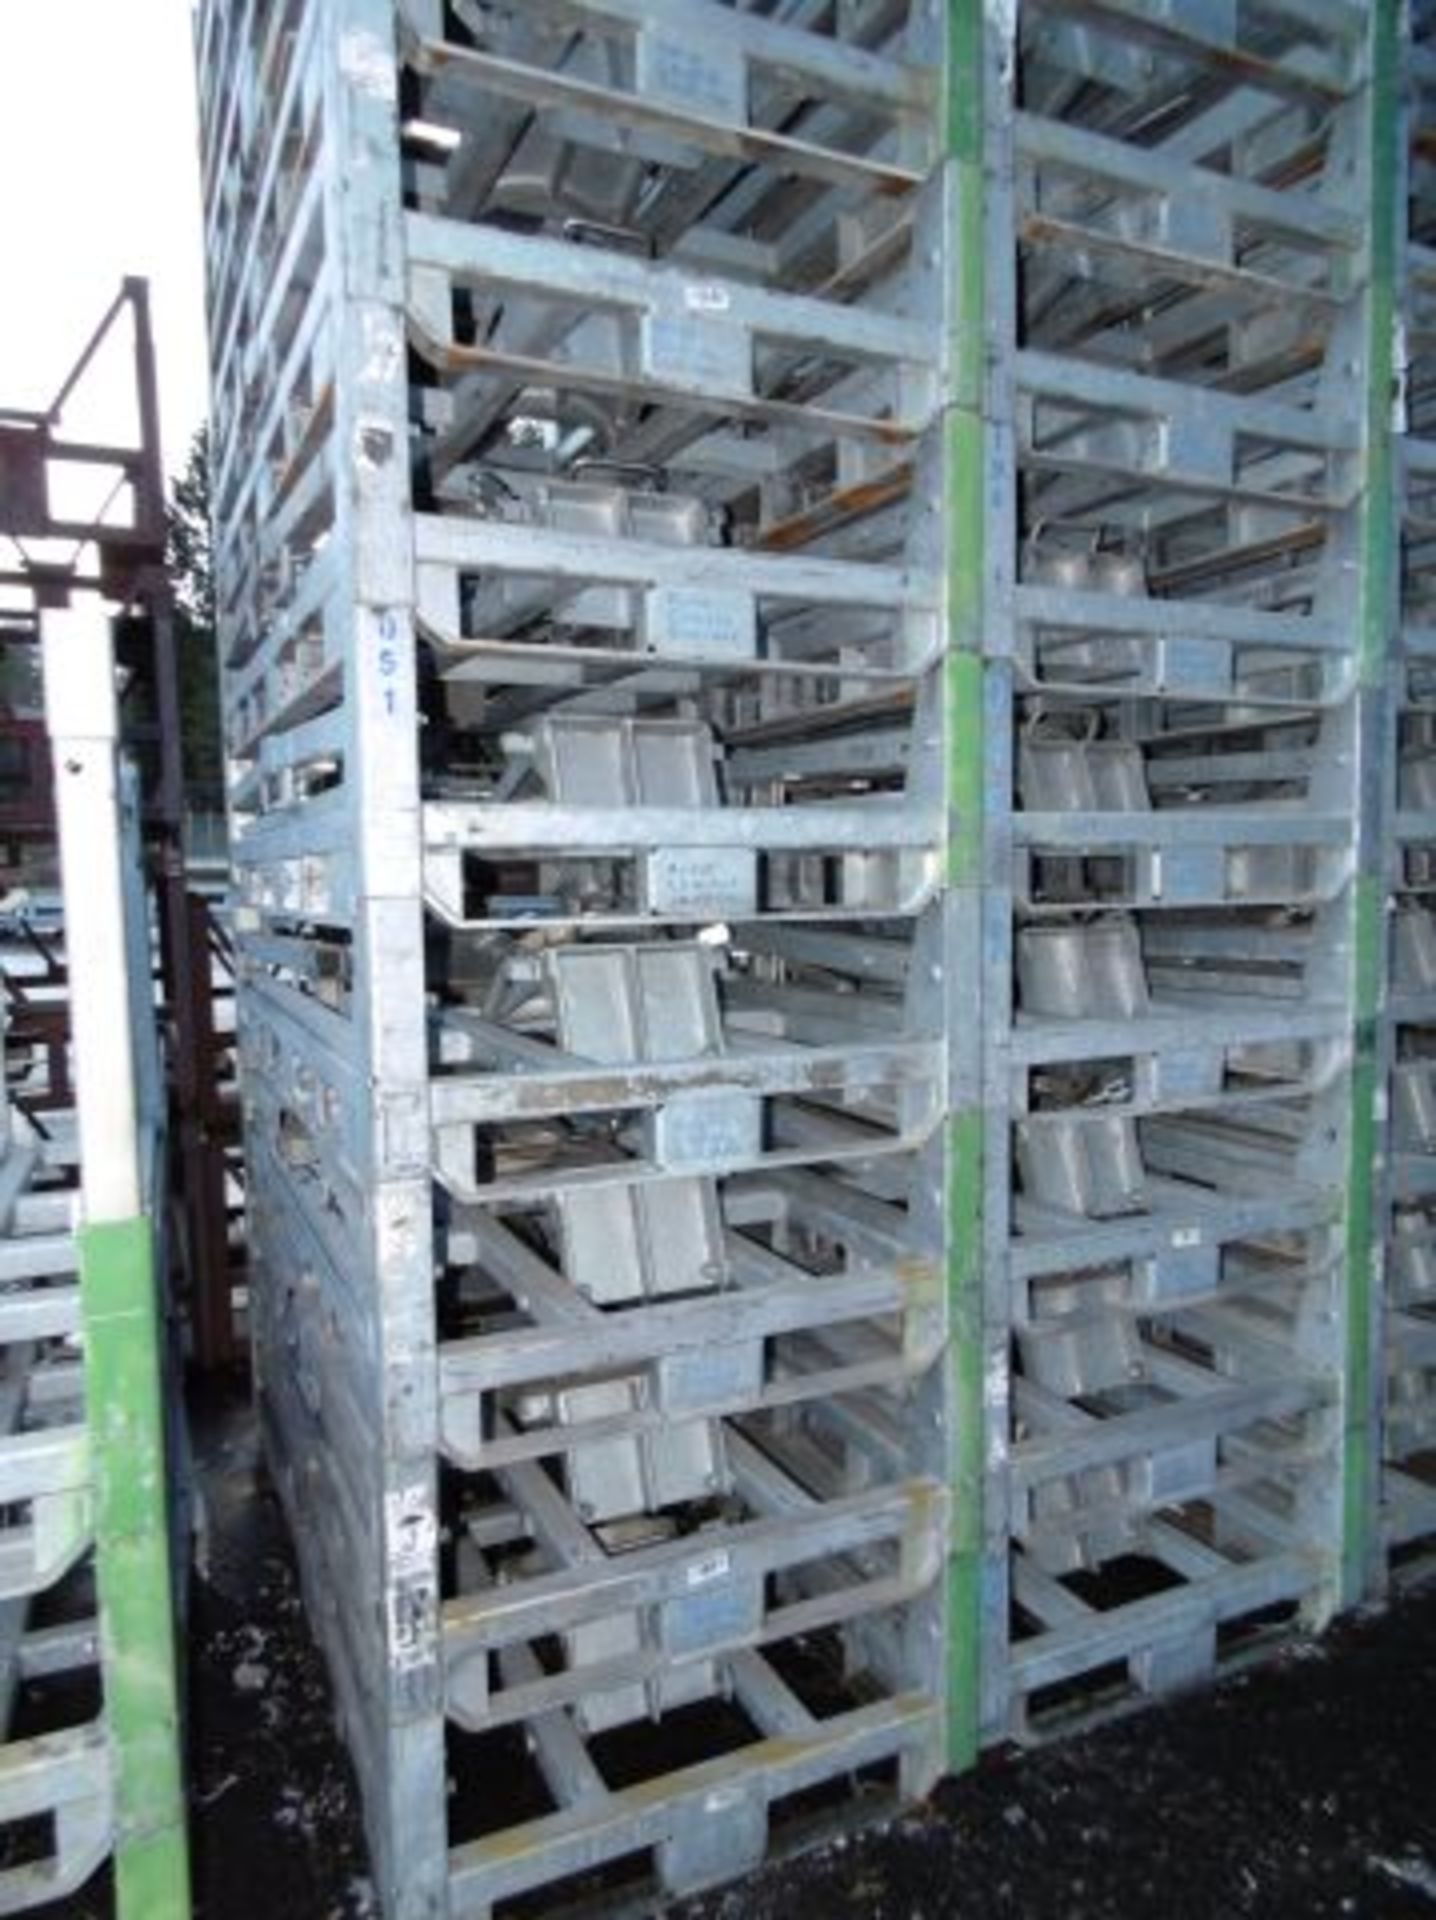 * 20 x Folding/Stackable Galvanised Steel Stillages; each 1950 x 1000mm. Loaded onto Buyer's - Image 2 of 2